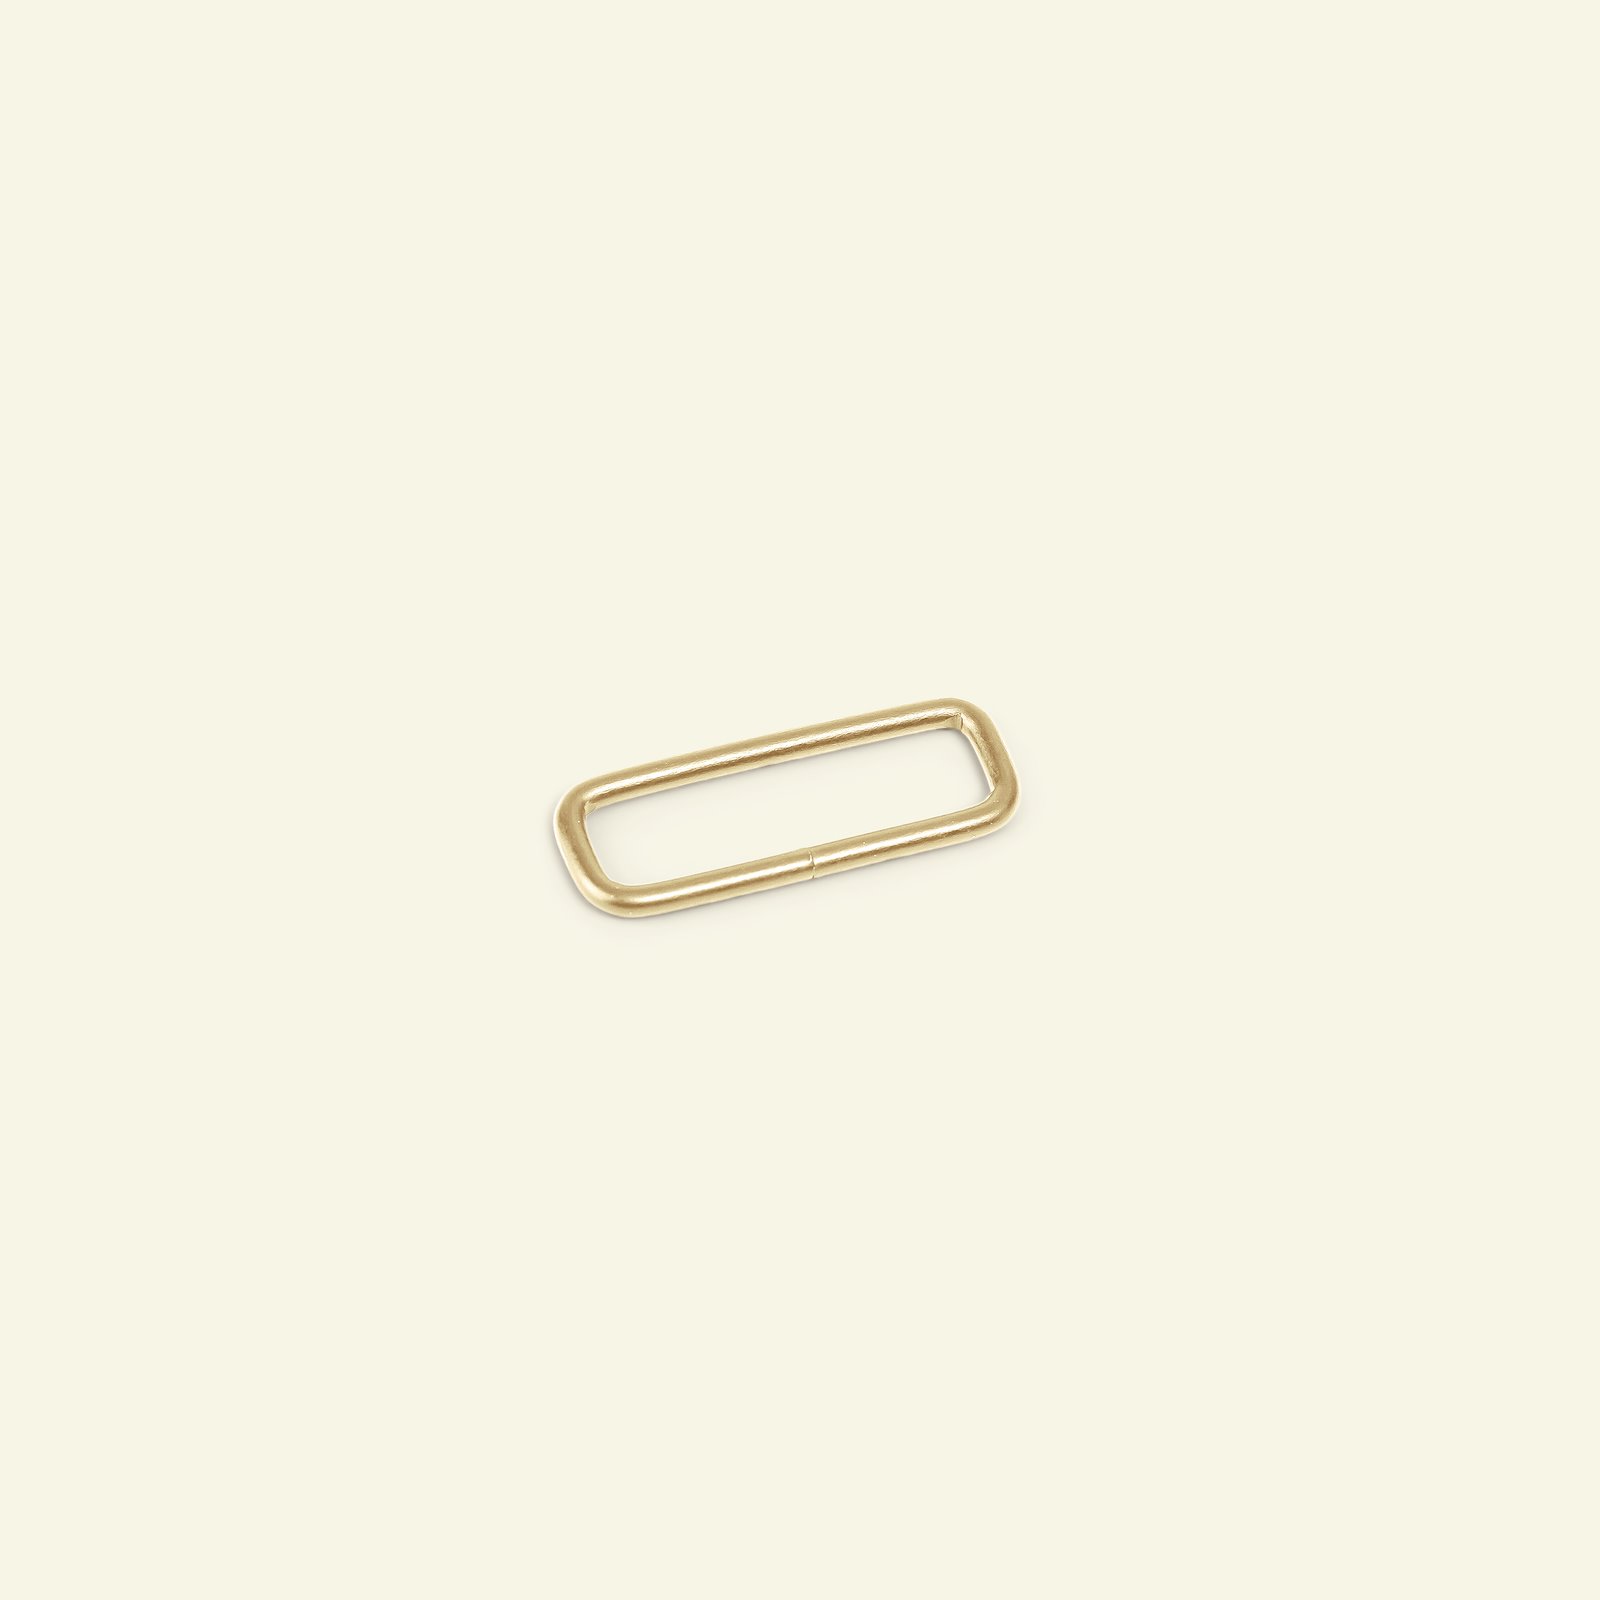 Ring square metal 38x10x3mm gold 1pc 45521_pack